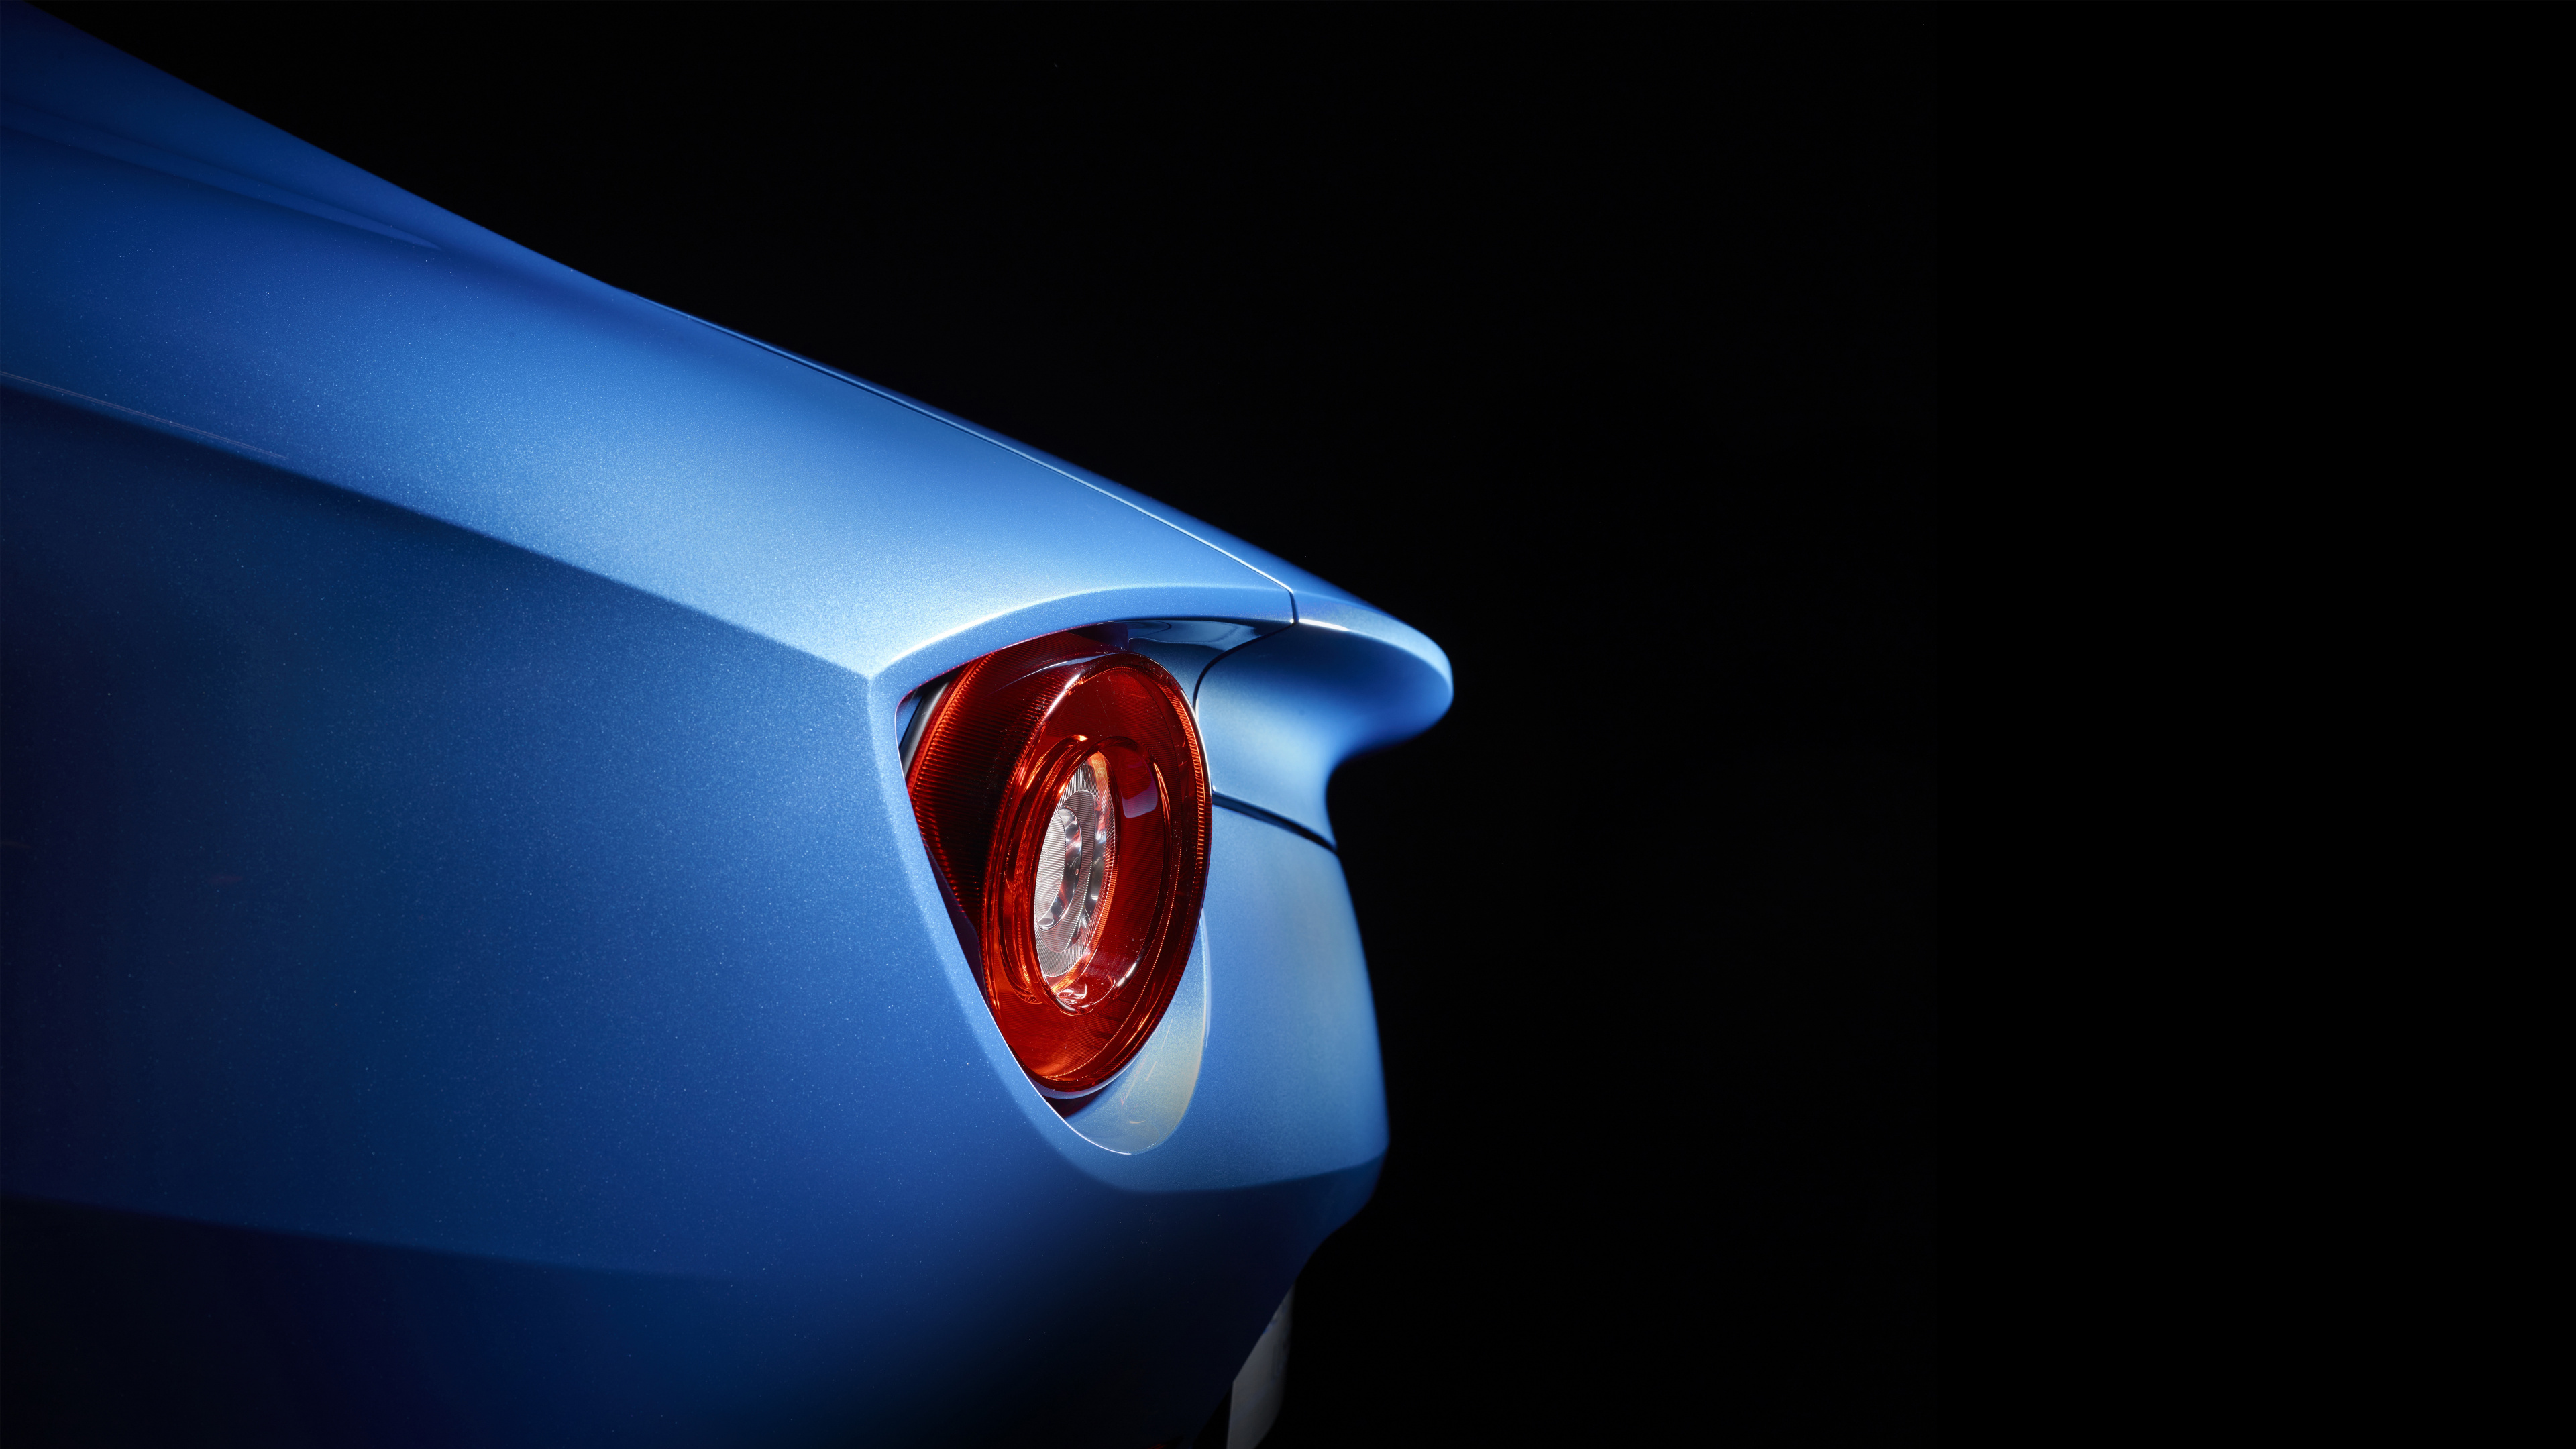 Blue Car With Red Light. Wallpaper in 3840x2160 Resolution